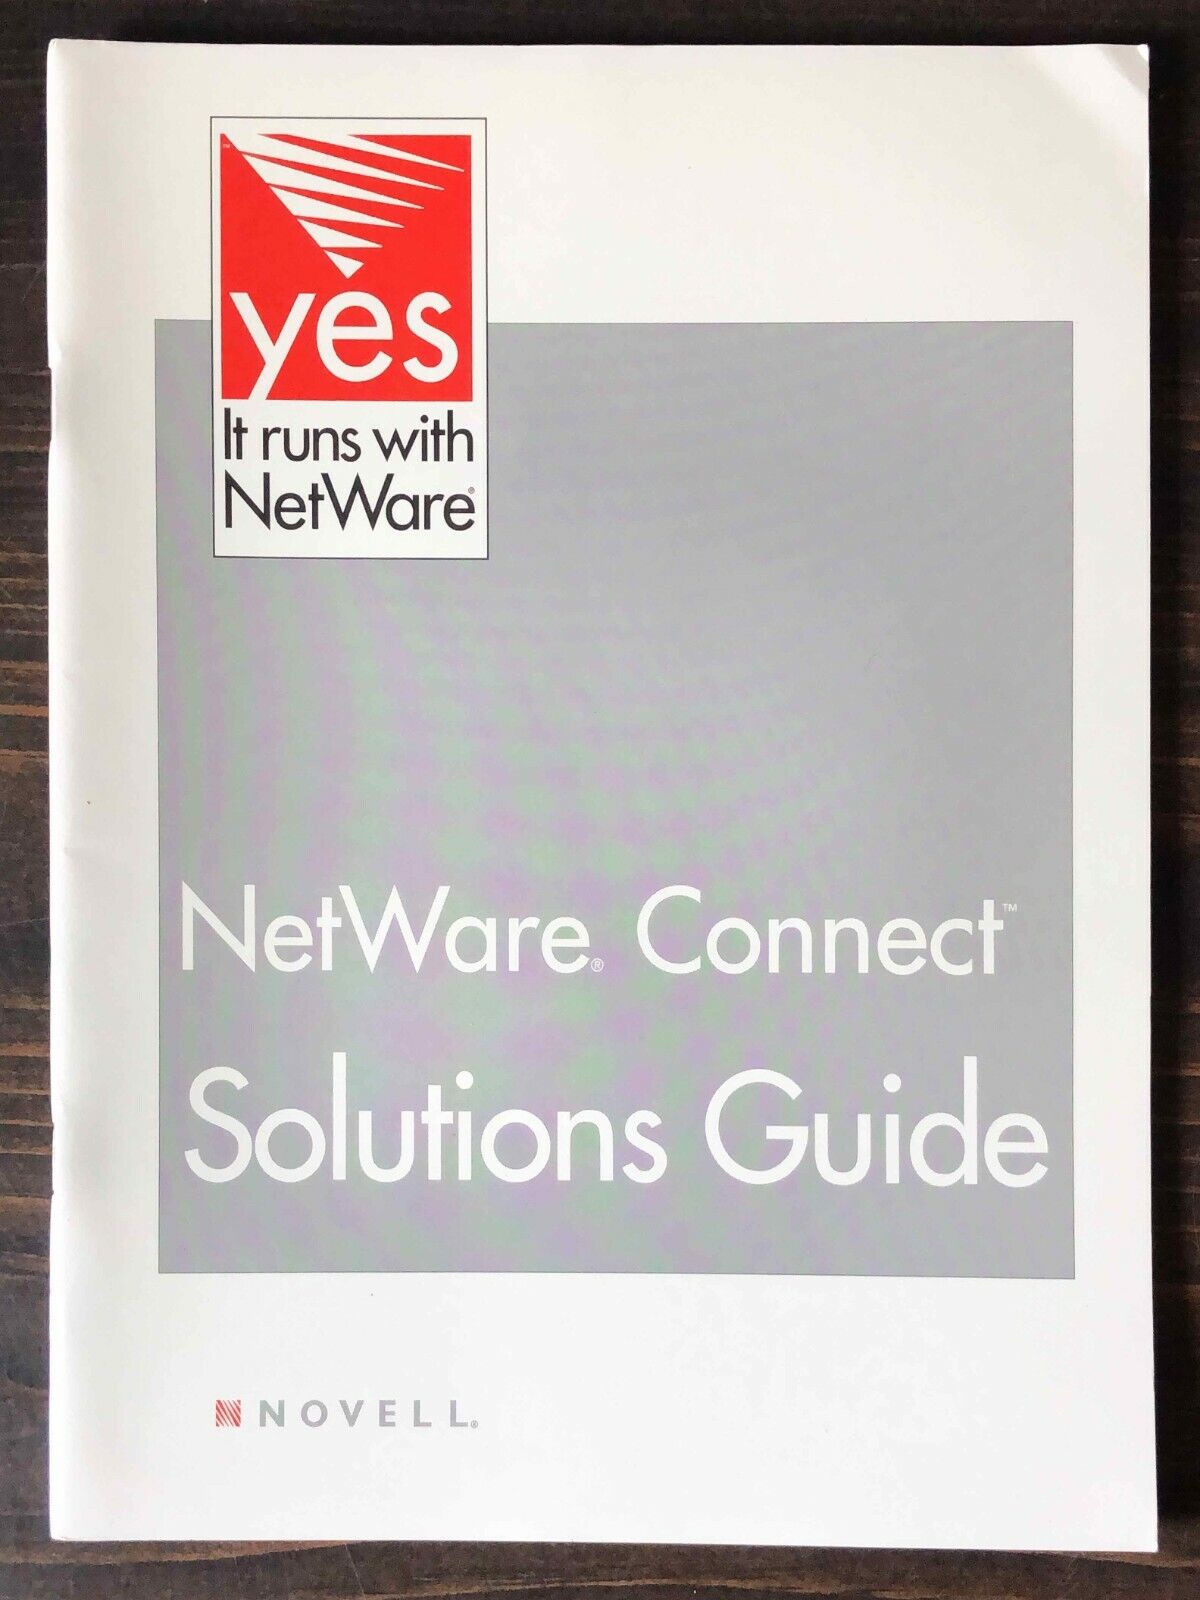 Novell - NetWare Connect Solutions Guide (1993)